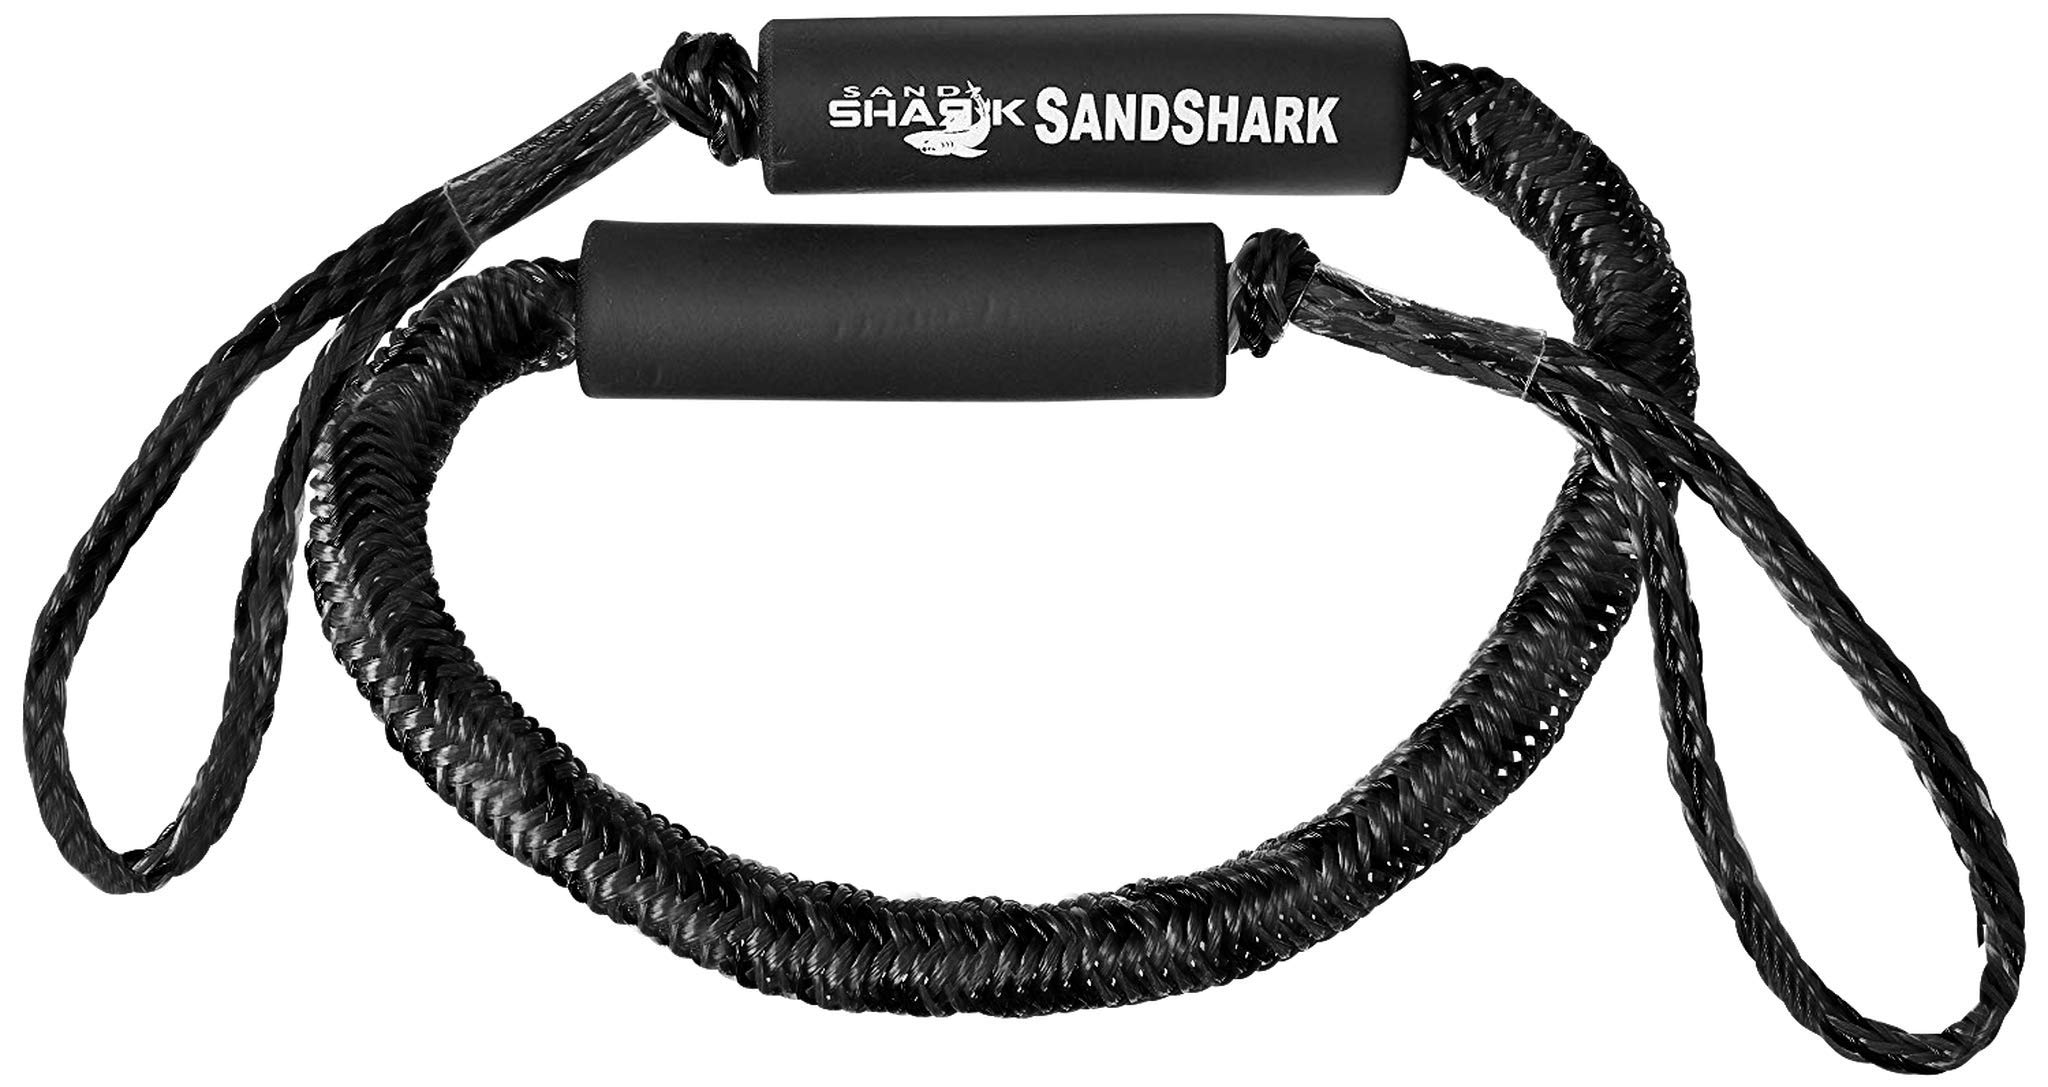 Premium Boat Bungee Dock Lines. Bungee Dock Line Stretches 4-5.5 ft.  Absorbs Shock to Cleats